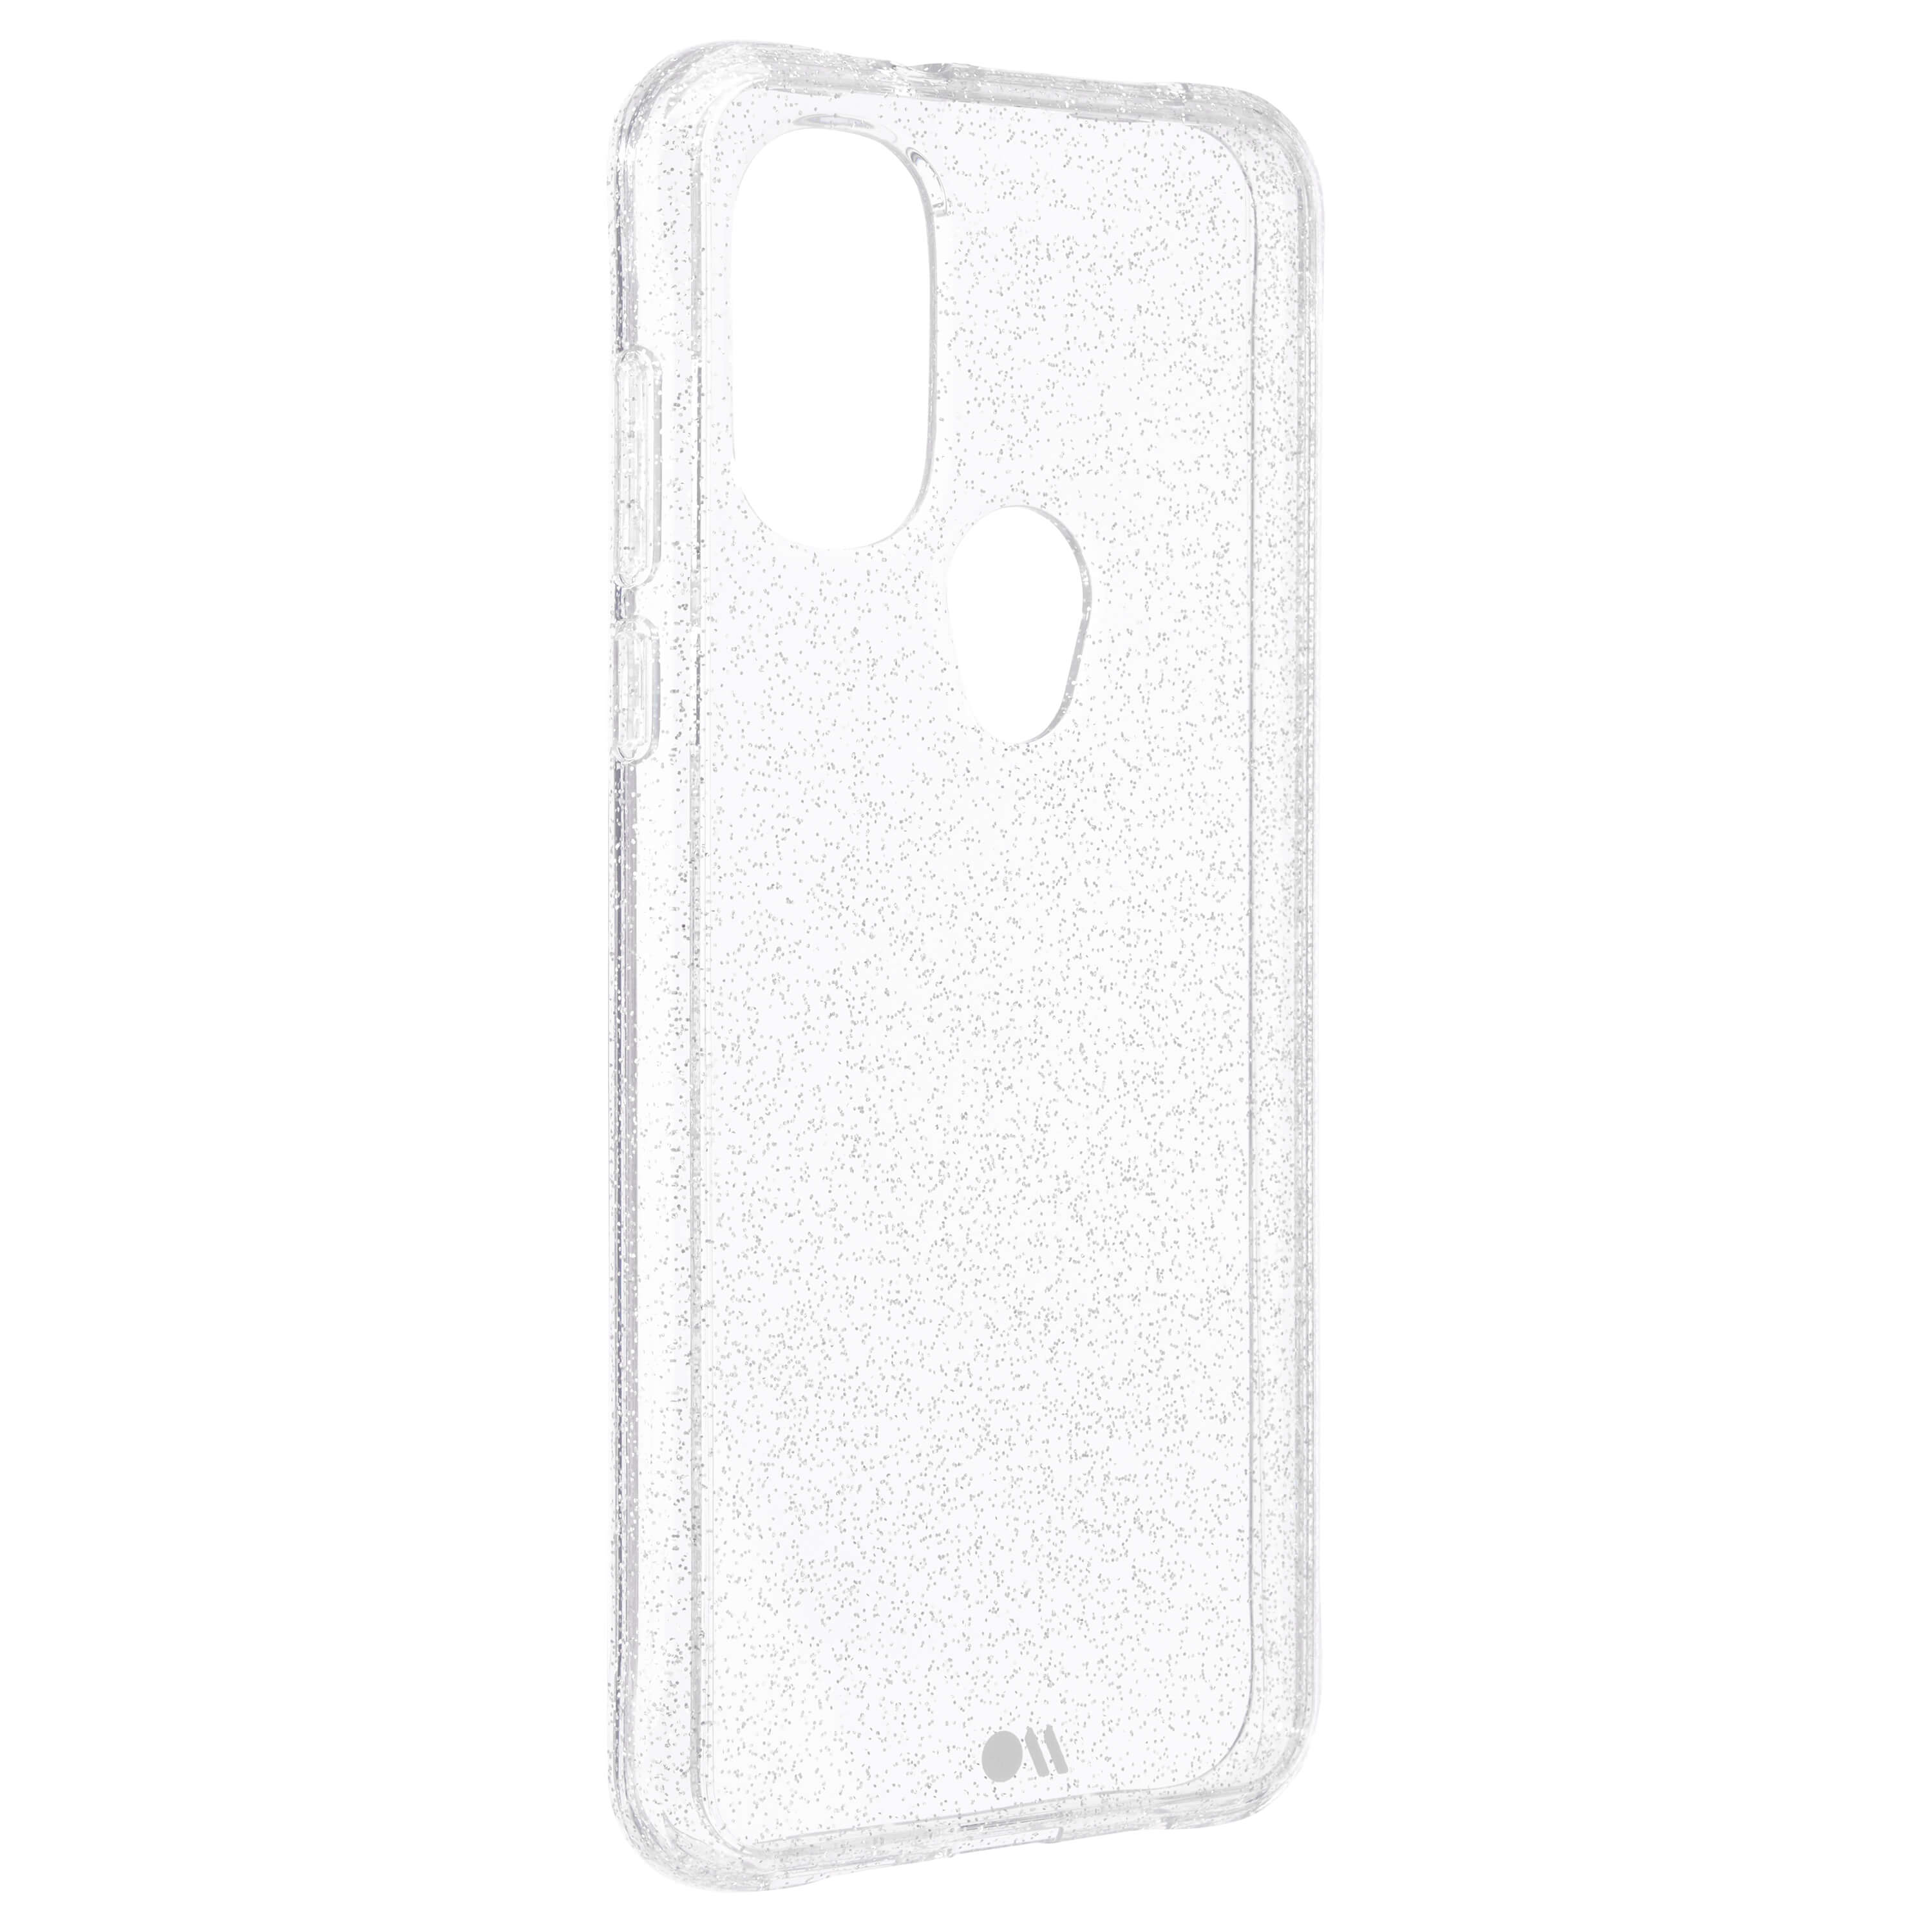 Sparkly clear case for Moto G Power 2022. color::Clear